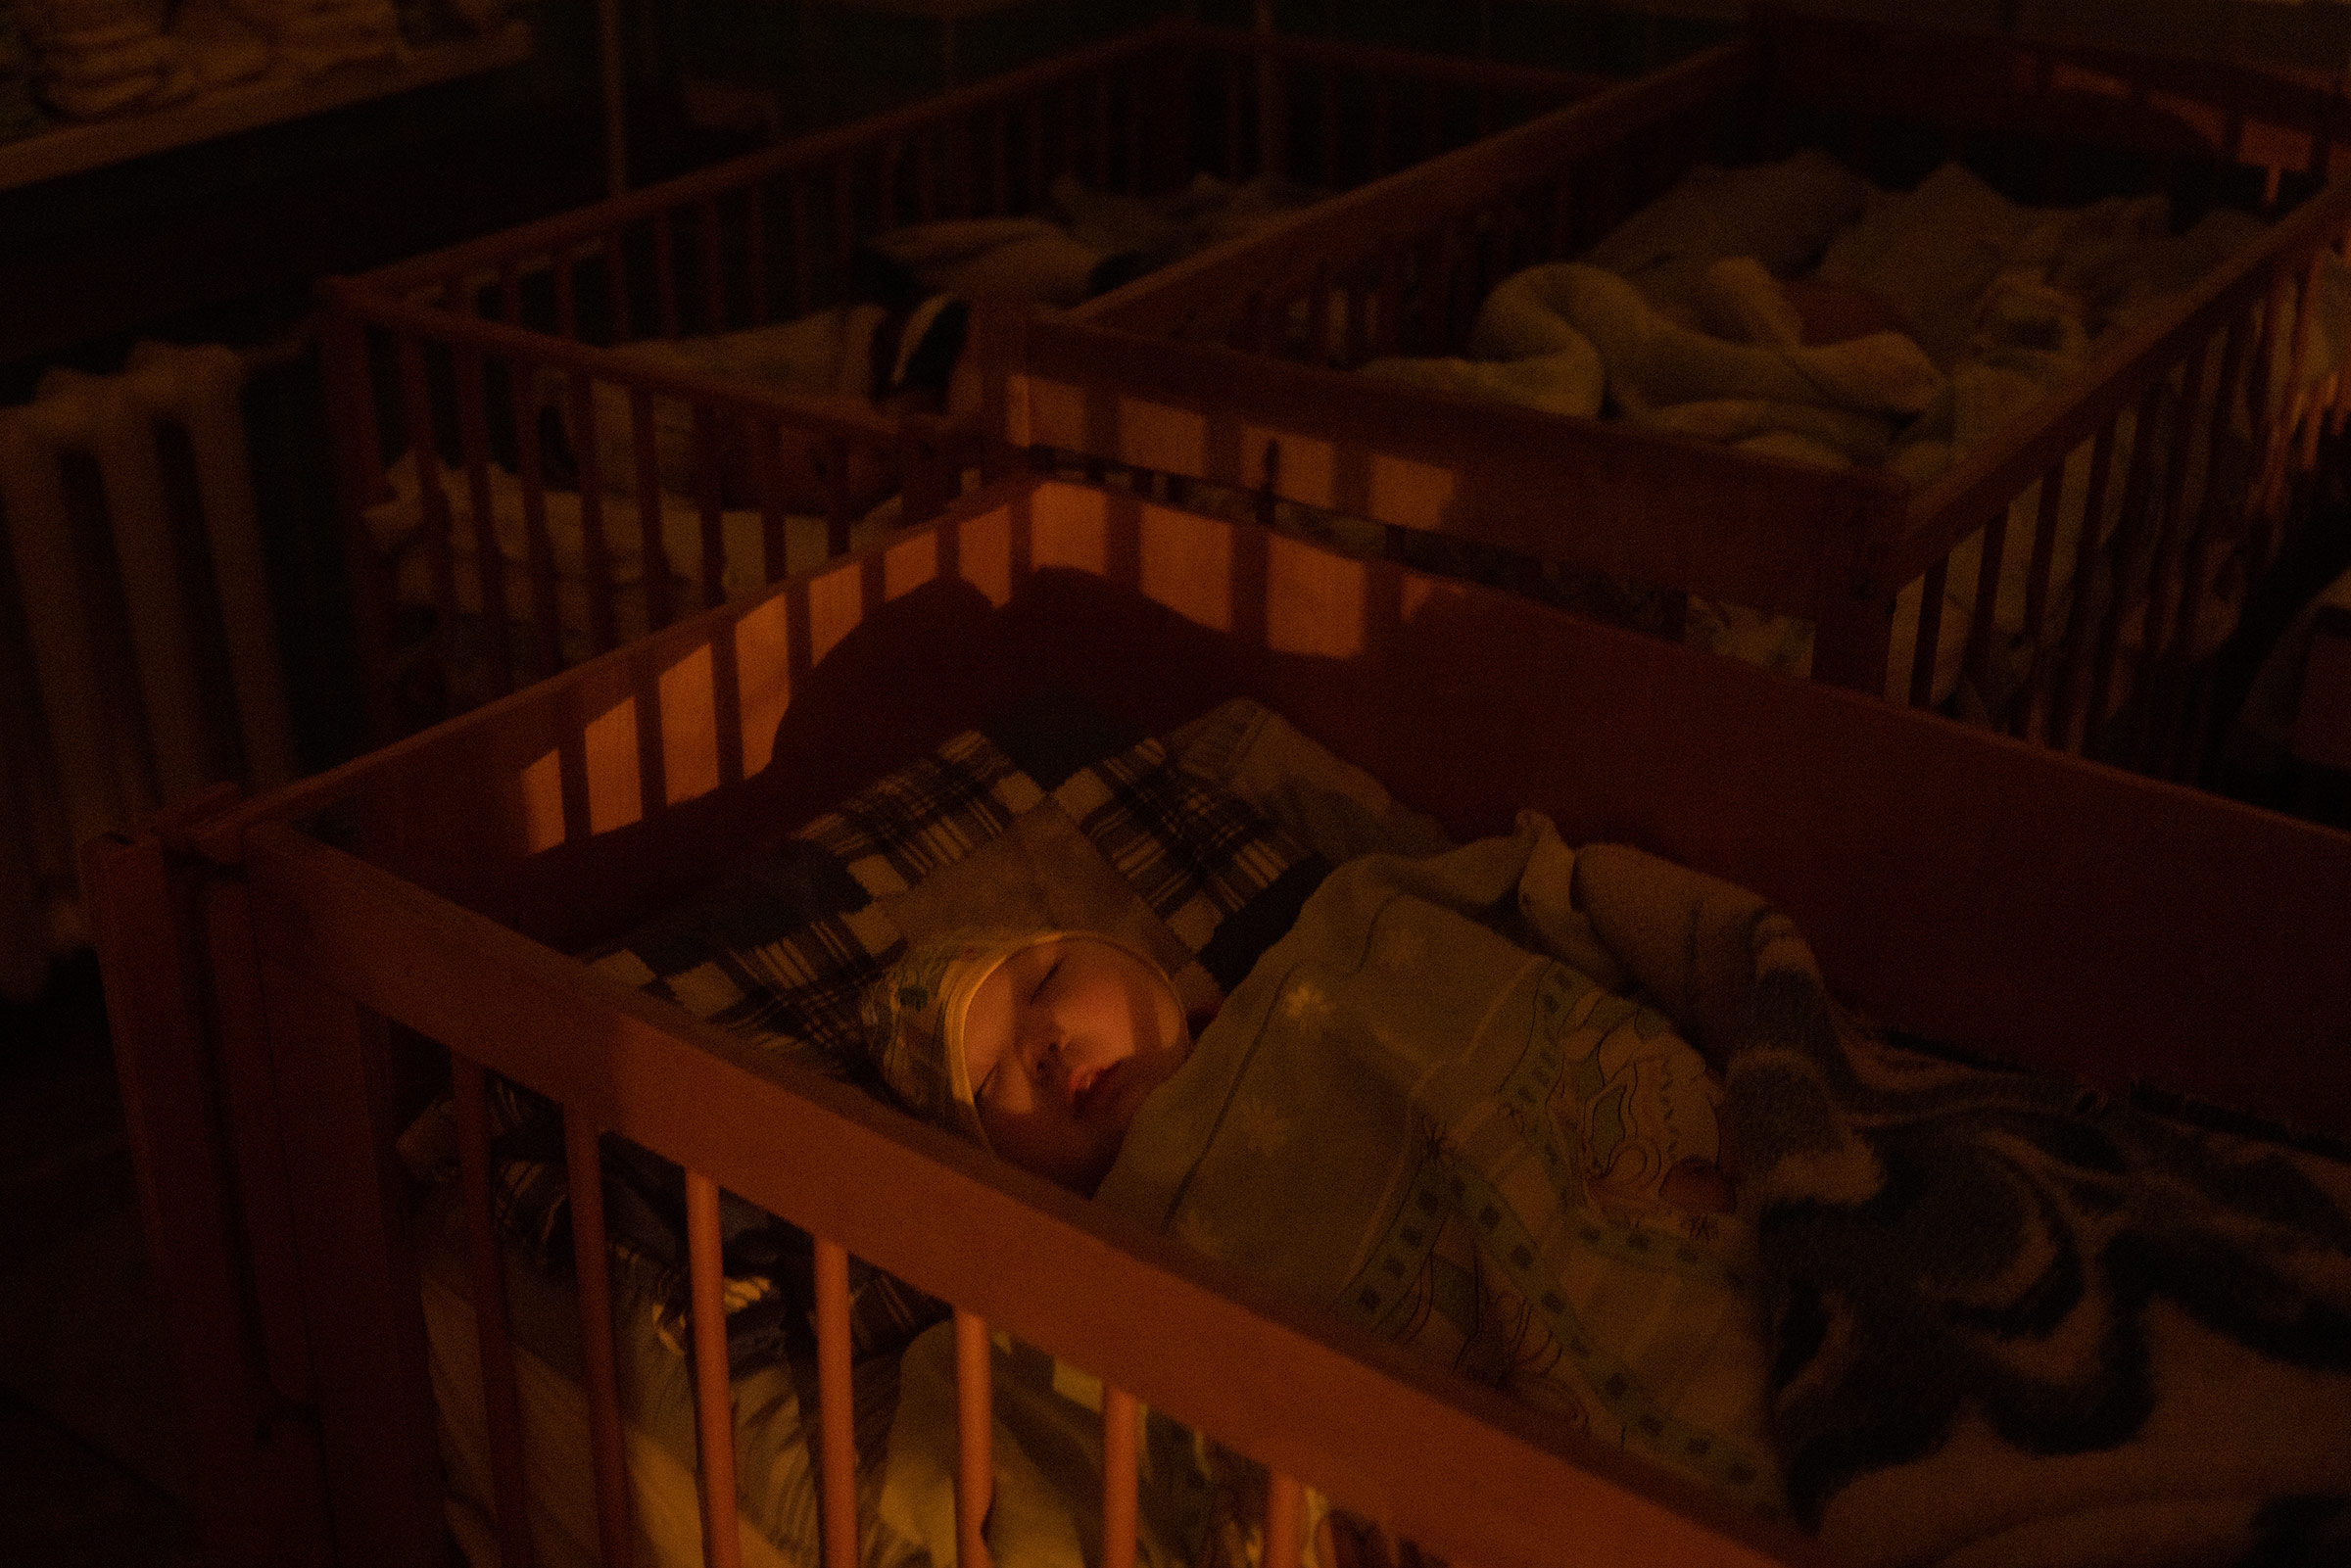 An orphan sleeps in their crib at the Kherson Regional Children’s hospital on Nov. 26, 2022 in Kherson, Ukraine. The hospital staff cared for a group of 10 orphans after hearing about the mass deportation of Ukrainian children to Russia. (Chris McGrath—Getty Images)